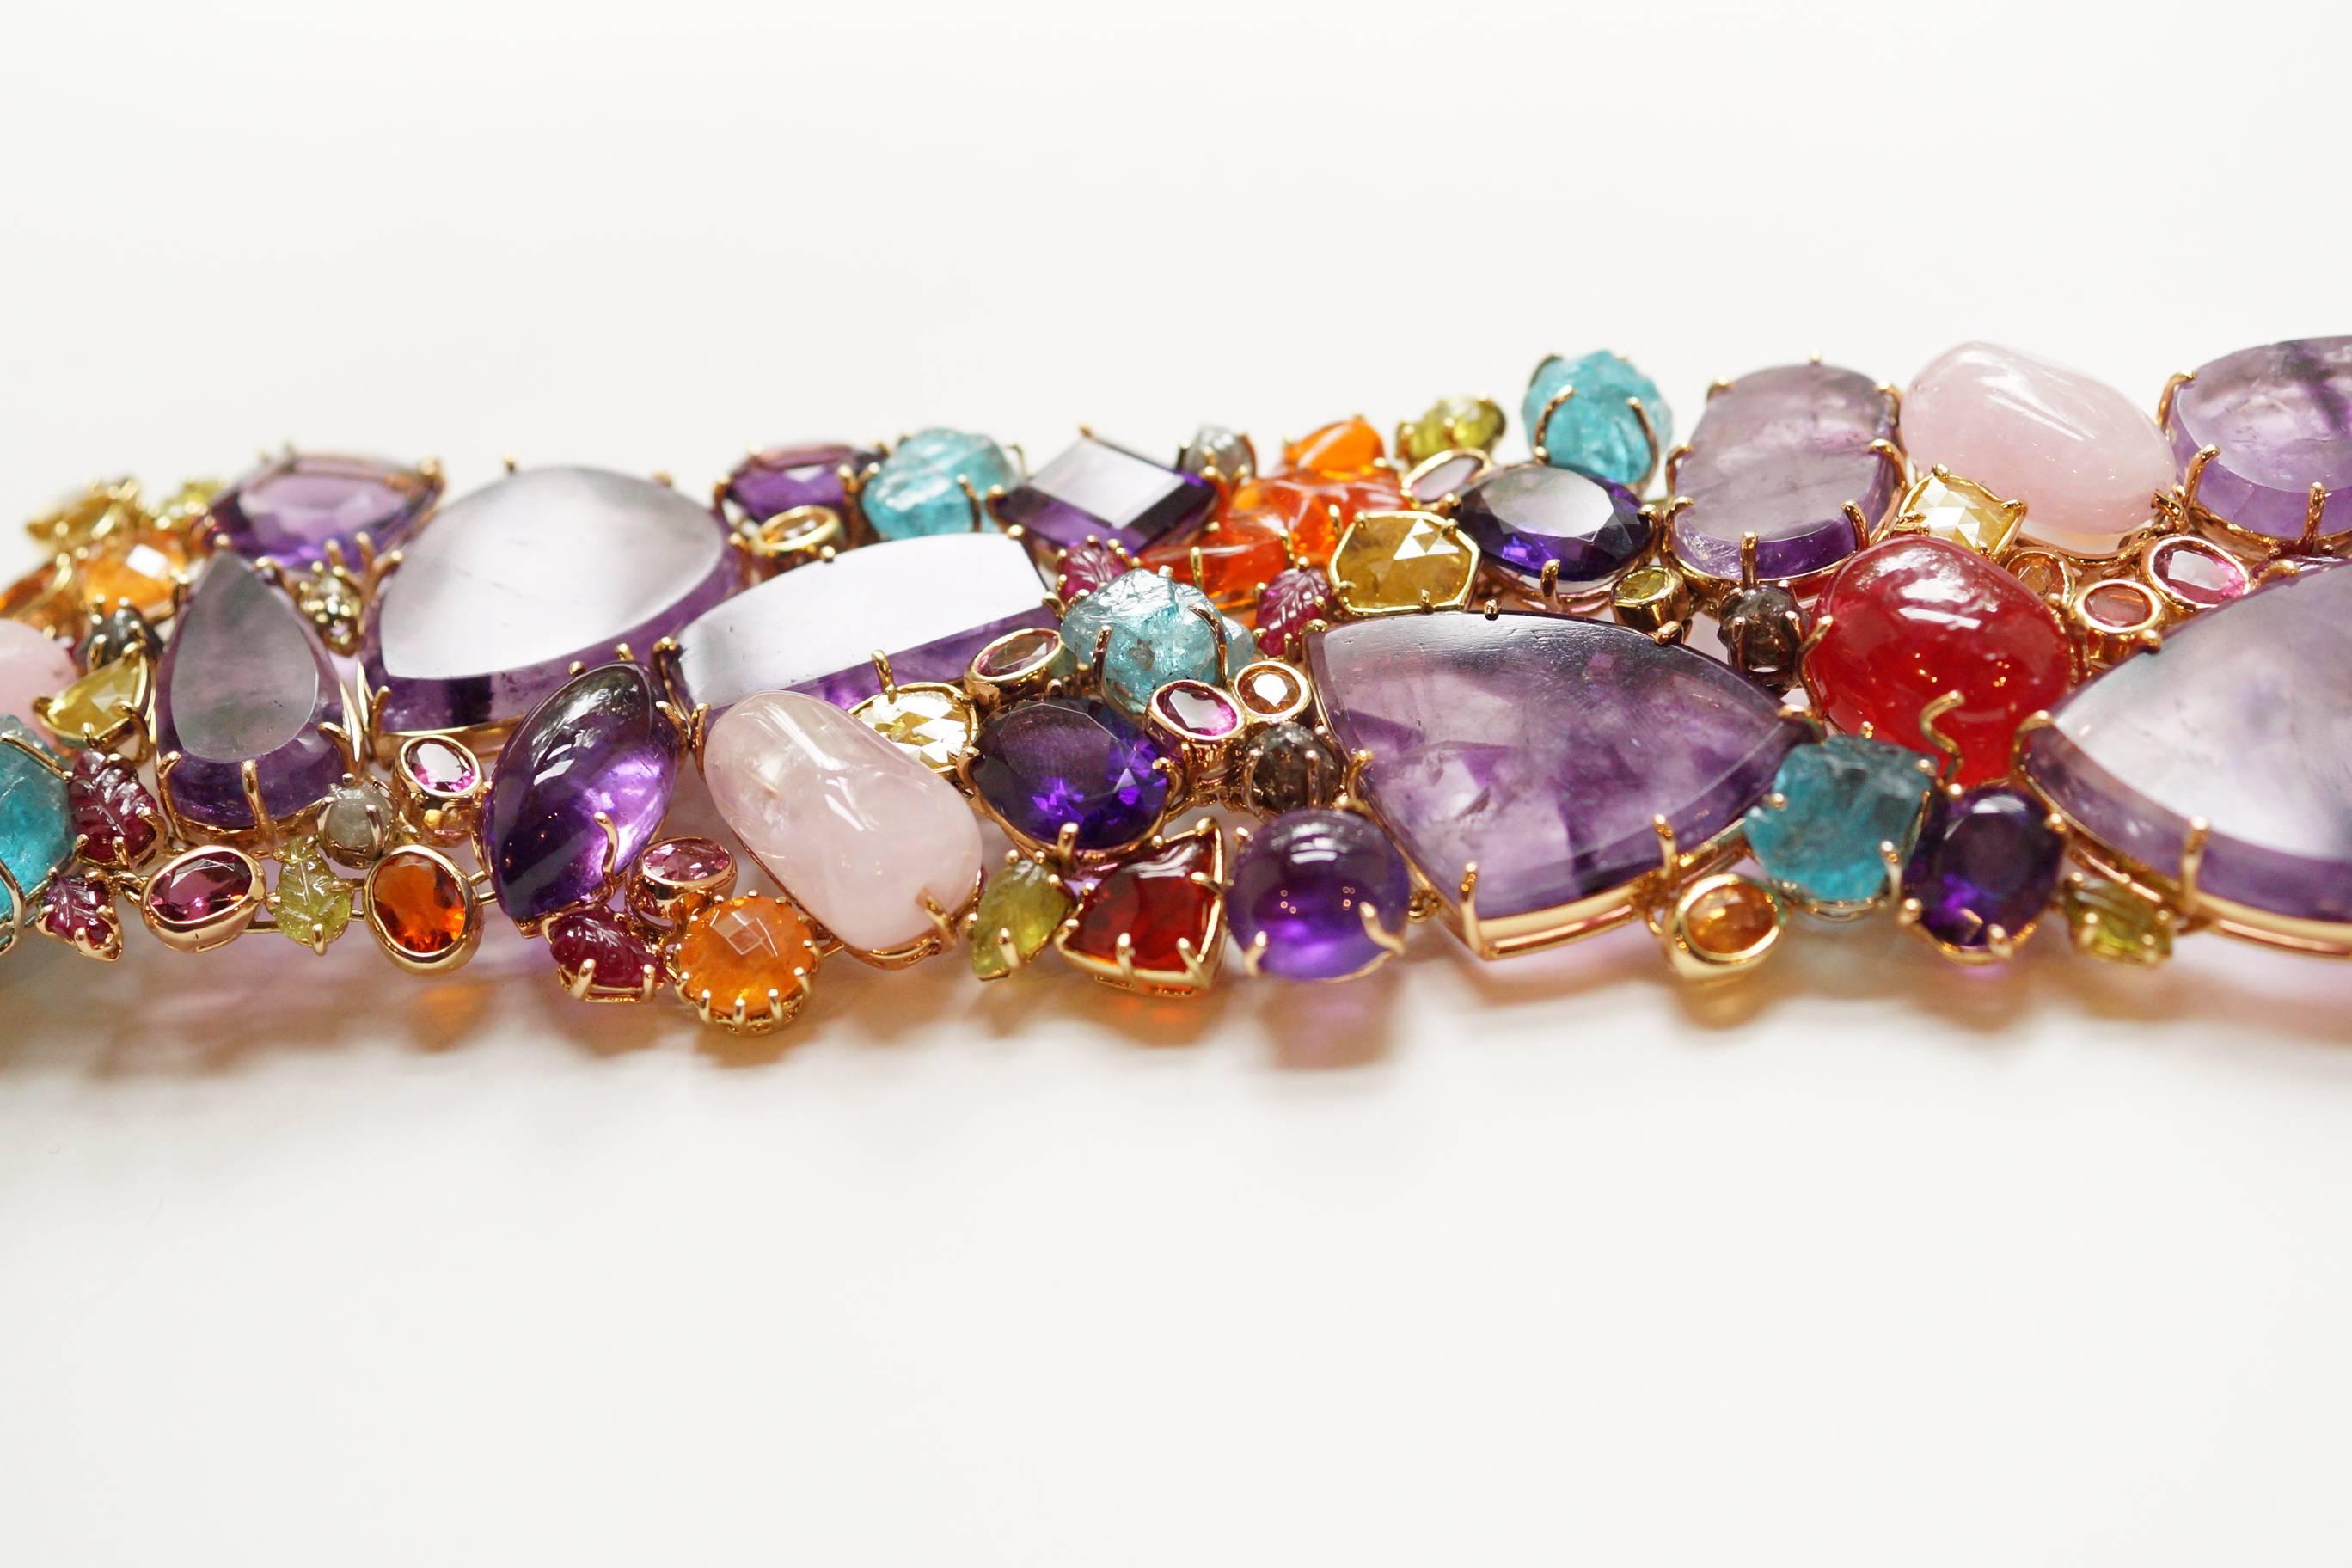 Pandora Bracelet
A large bracelet composed of a mélange of natural gemstones and diamonds, living side-by-side in chaotic harmony.  The largest gems in this piece, which define the structure, are flat slices of natural amethyst.  They have been